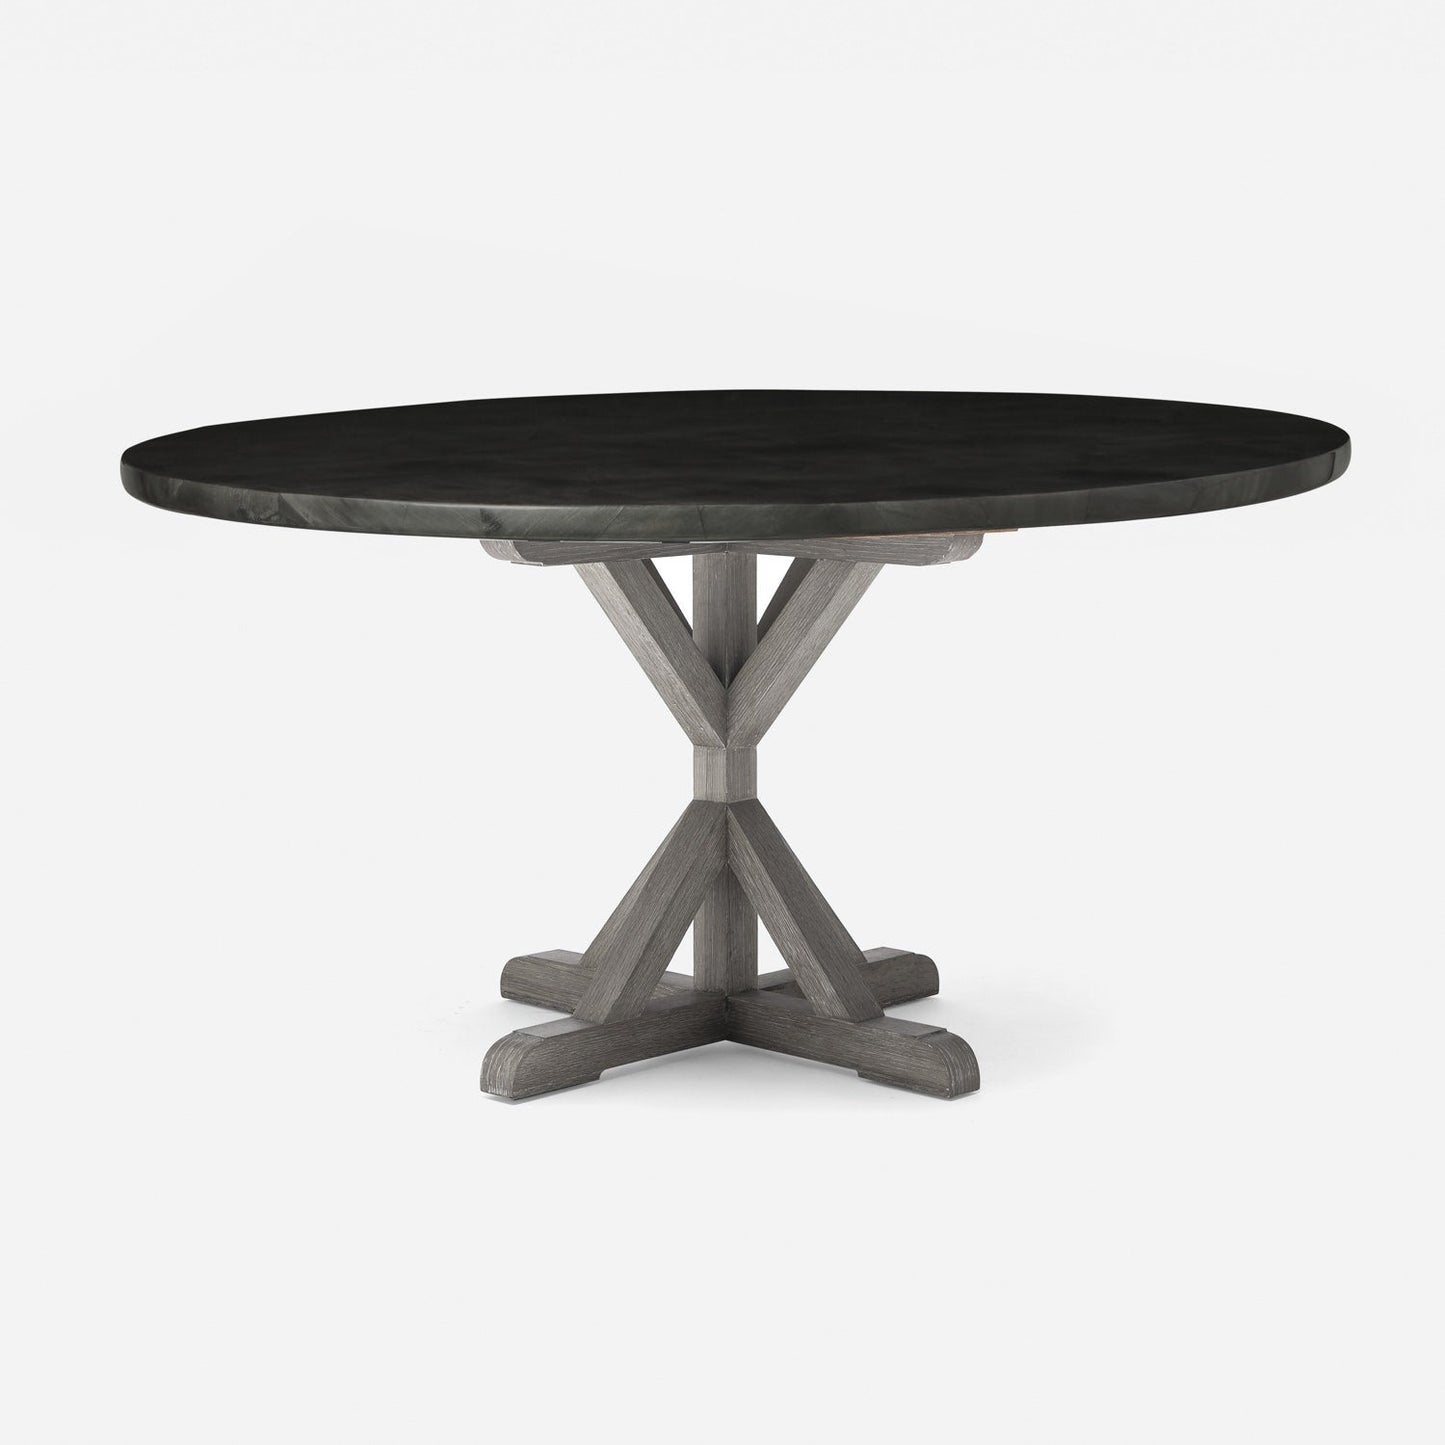 Made Goods Dane 54" x 30" Gray Cerused Oak Dinning Table With Round Dark Faux Horn Table Top